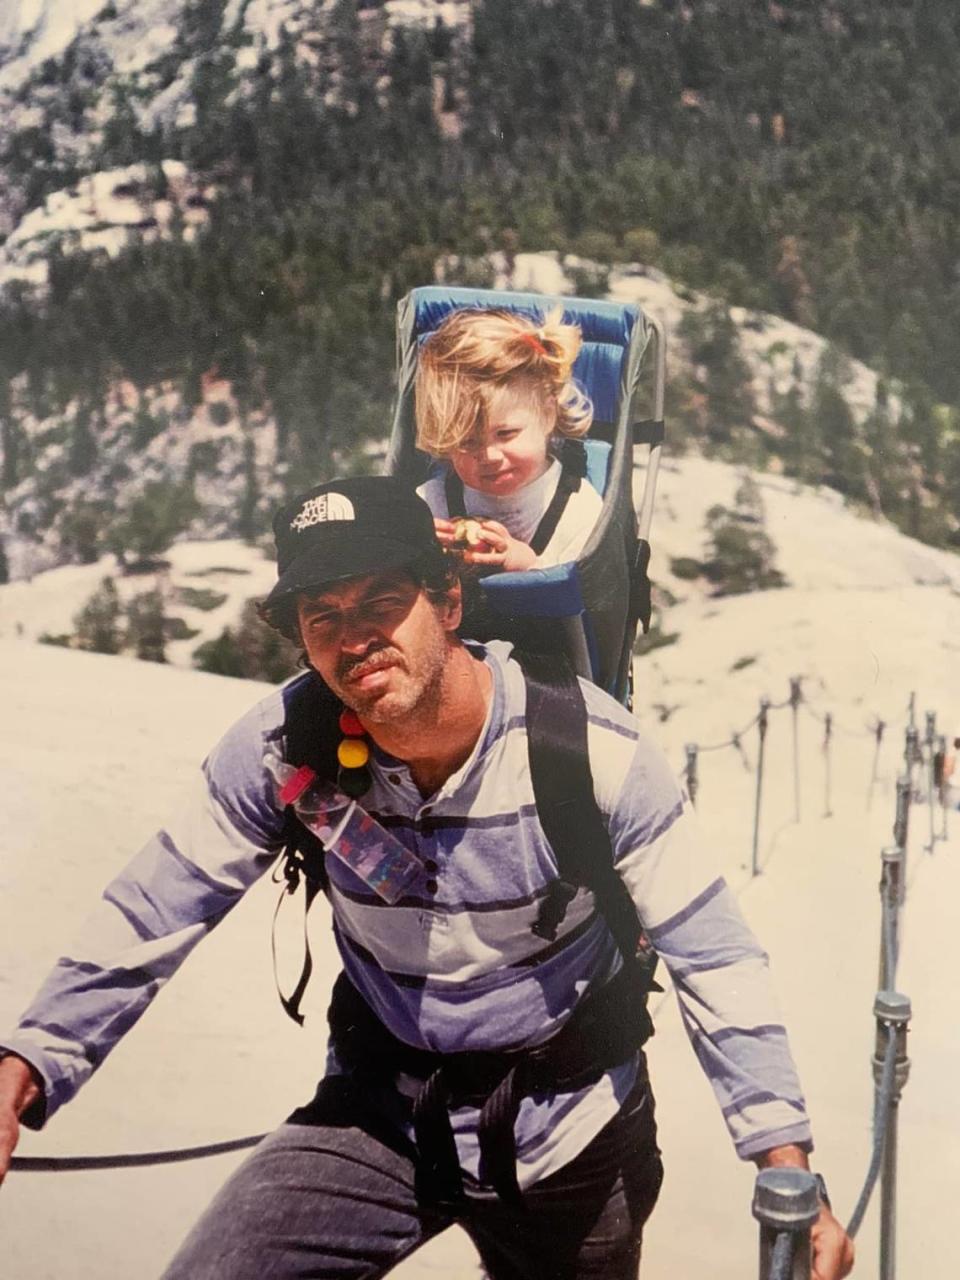 Mike Corbett and his daughter, Ellie, on Half Dome.